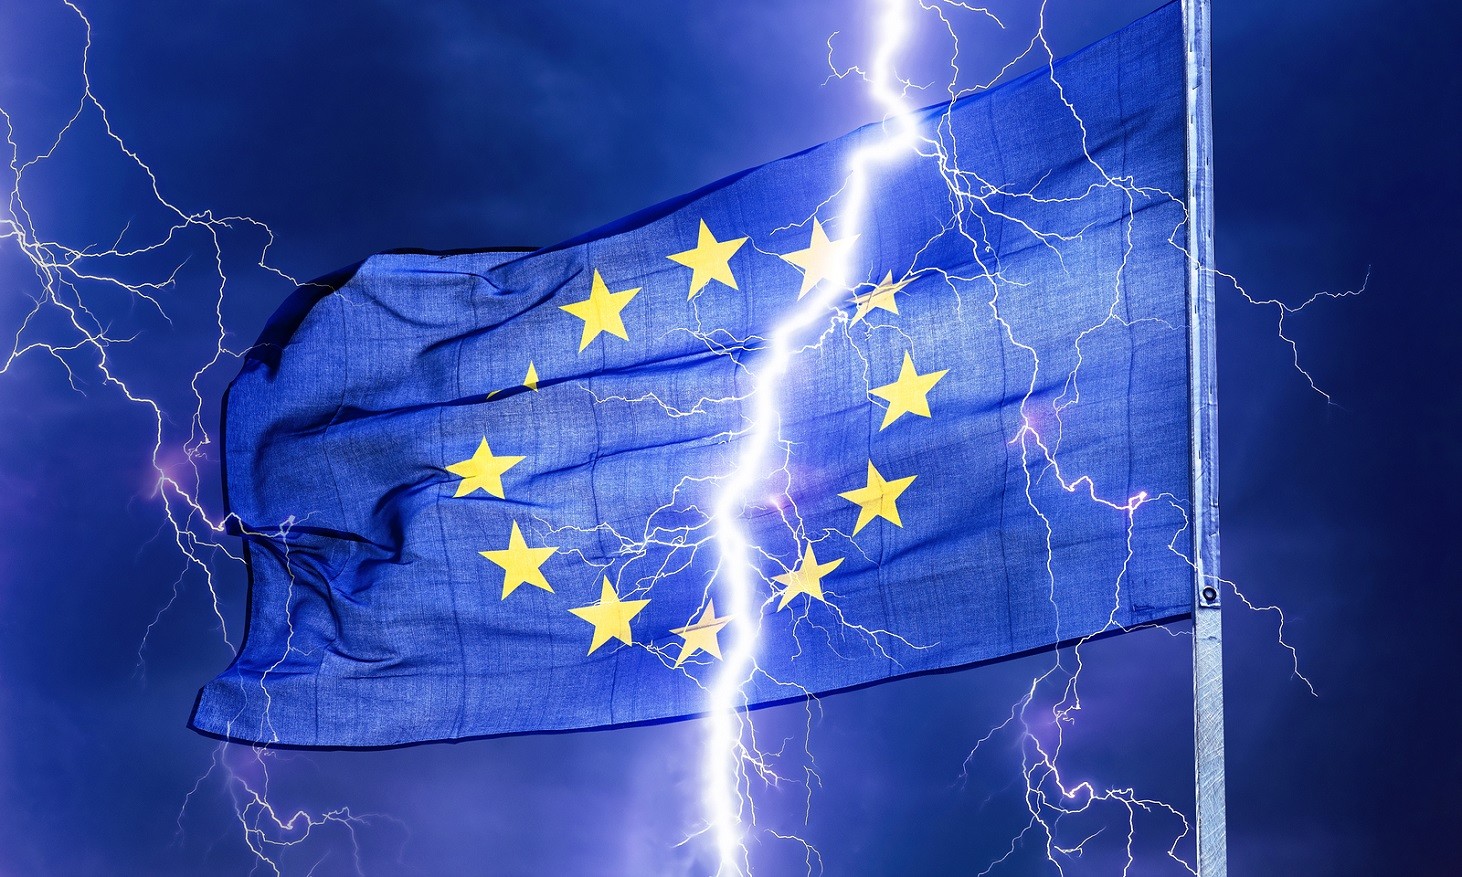 A flash of lightning seems to split an European flag into two parts.